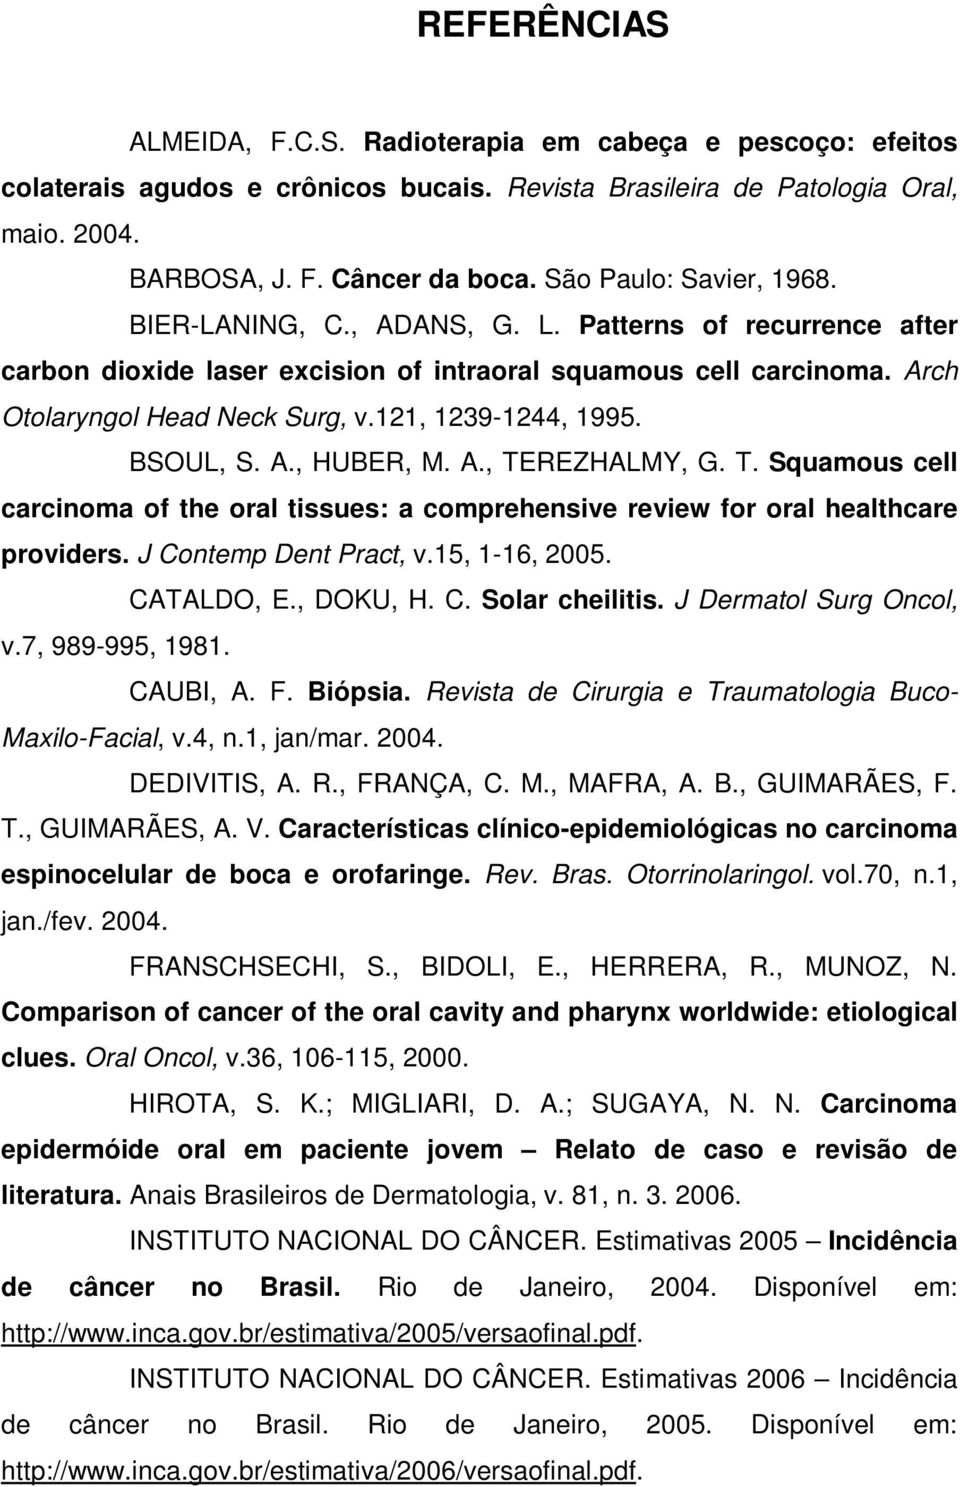 121, 1239-1244, 1995. BSOUL, S. A., HUBER, M. A., TEREZHALMY, G. T. Squamous cell carcinoma of the oral tissues: a comprehensive review for oral healthcare providers. J Contemp Dent Pract, v.